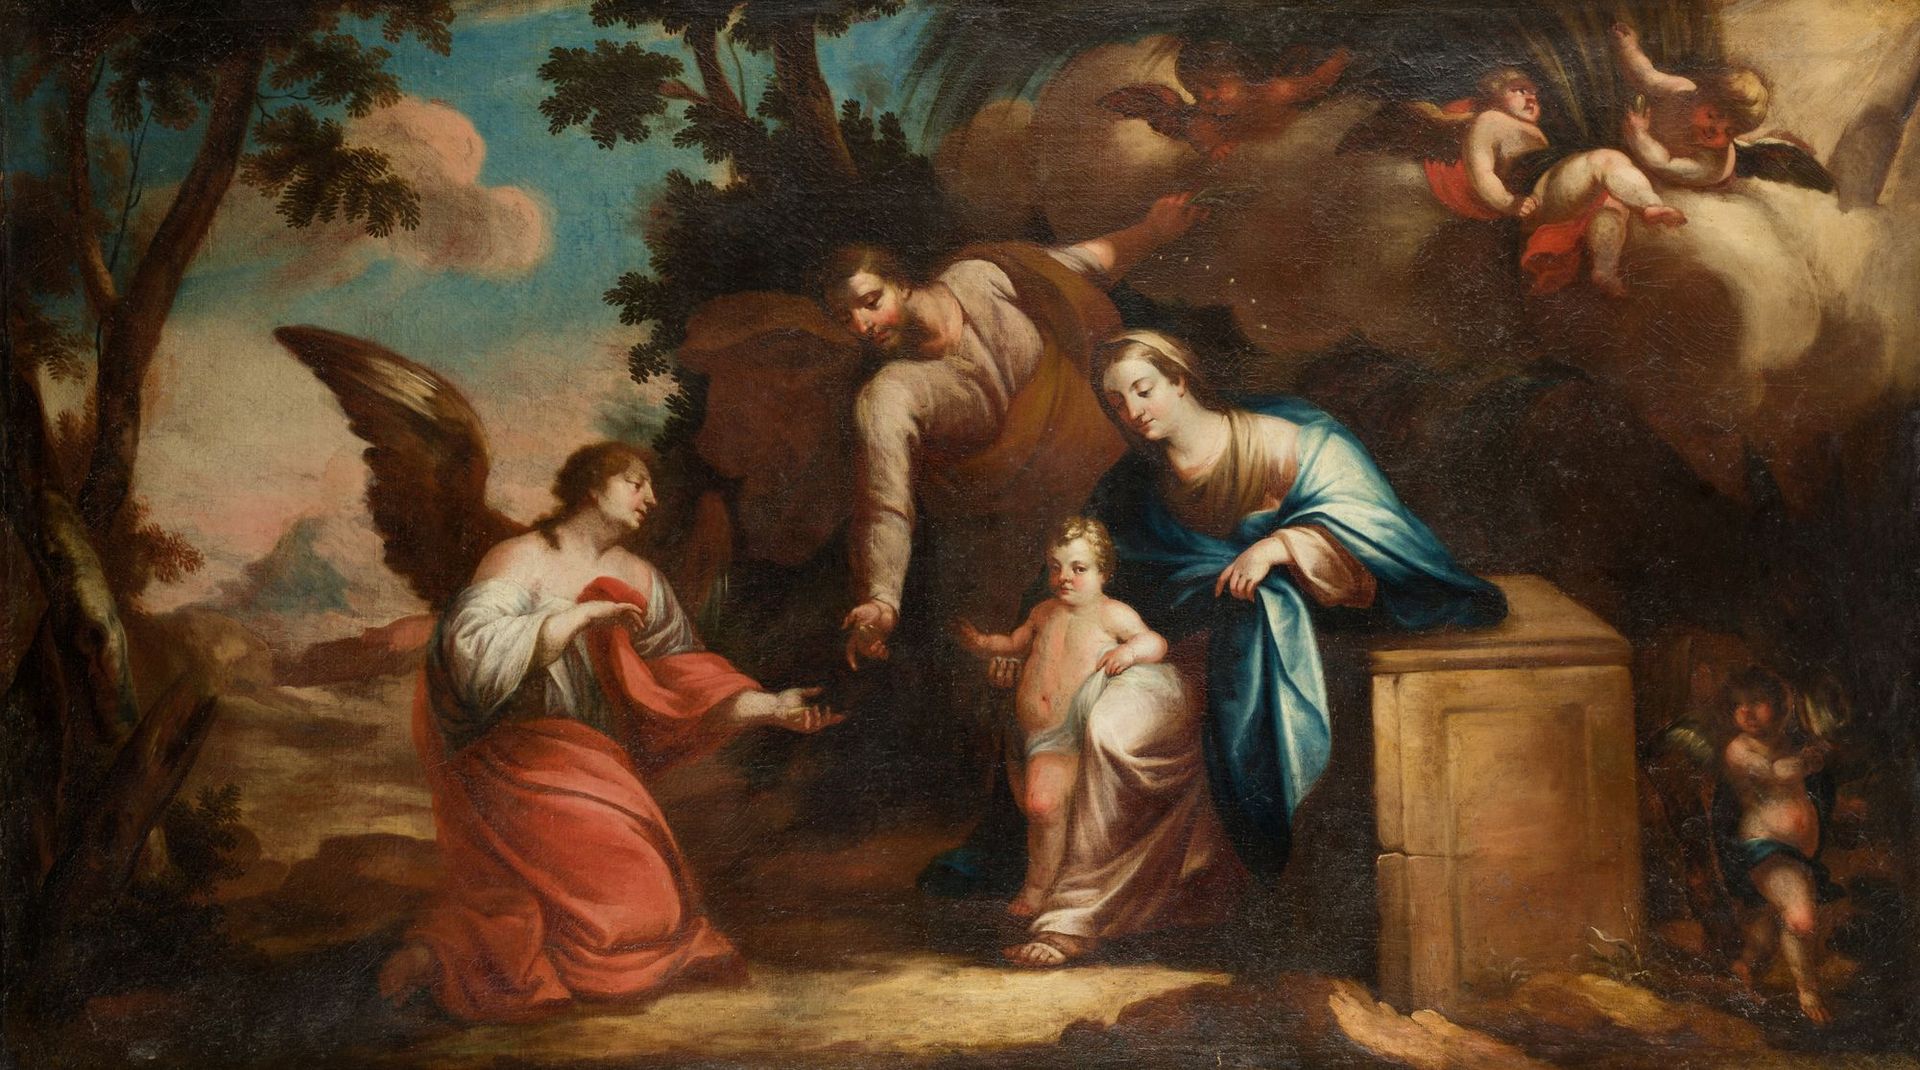 SPANISH SCHOOL (Late C. 17th - Early C. 18th) "Resting in the flight to Egypt" O&hellip;